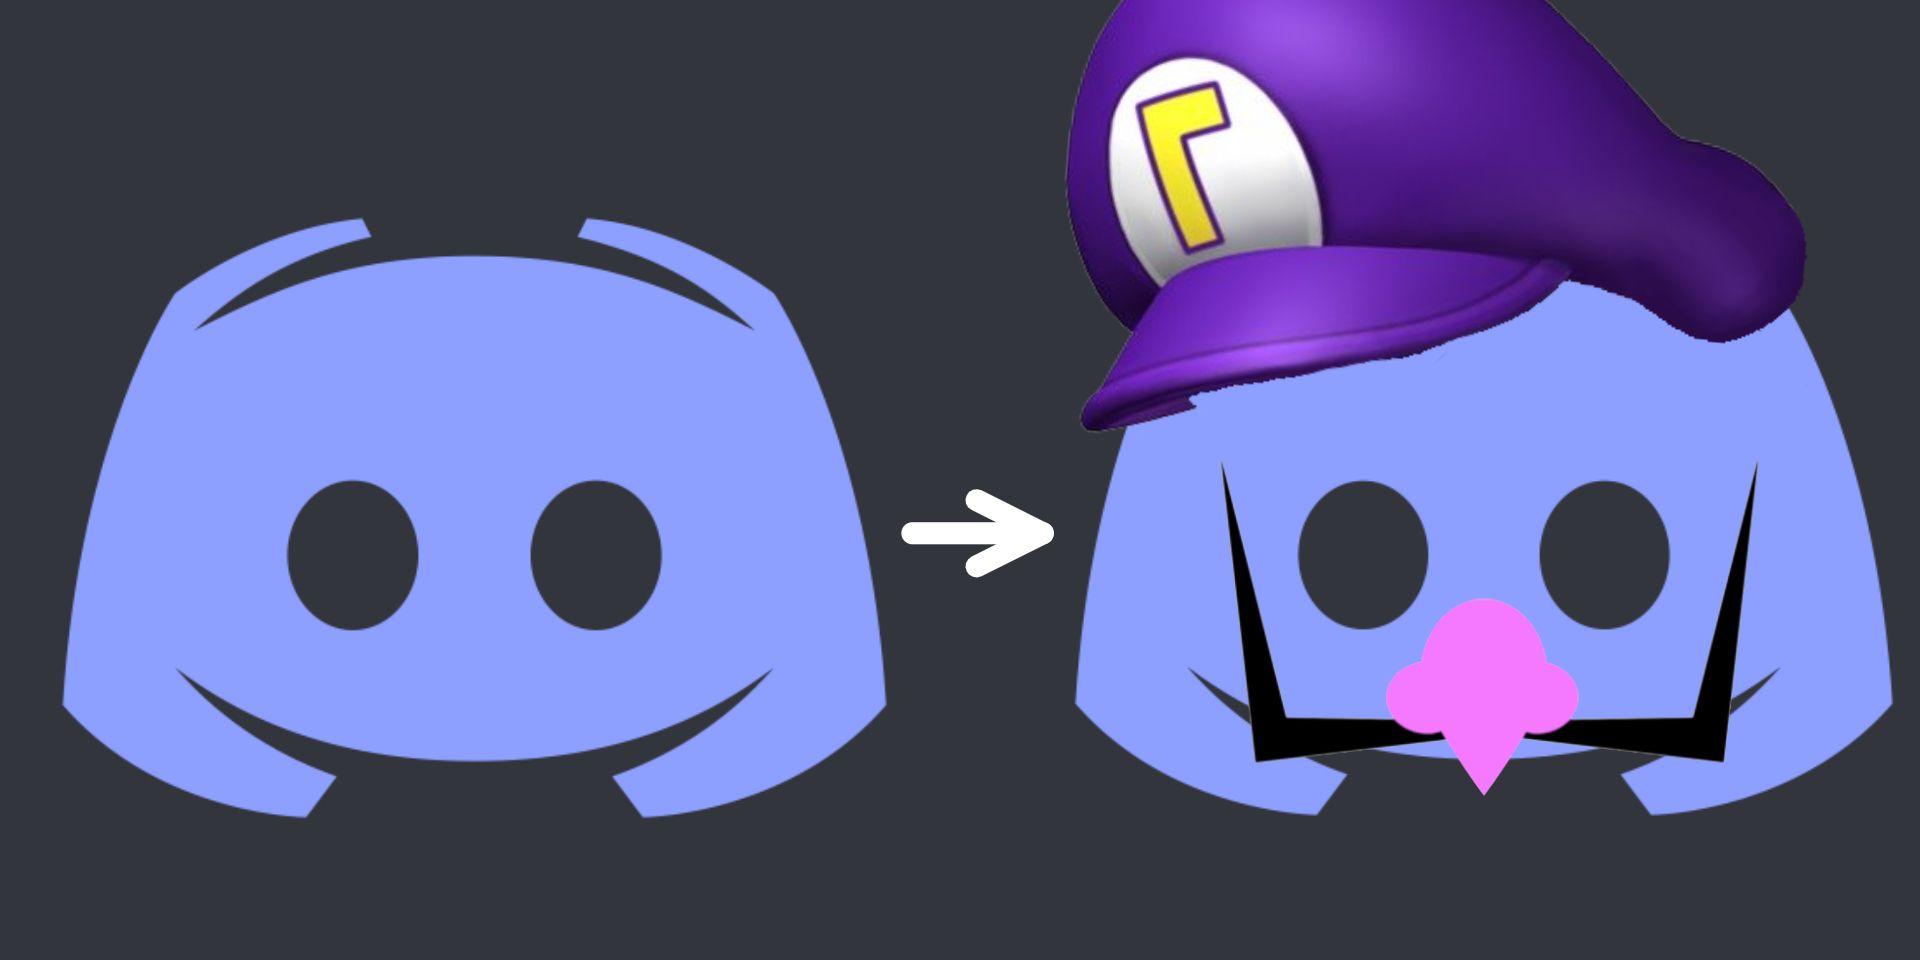 Pfp Ideas : 8 Funny Discord Profile Picture Ideas And How To Make Them